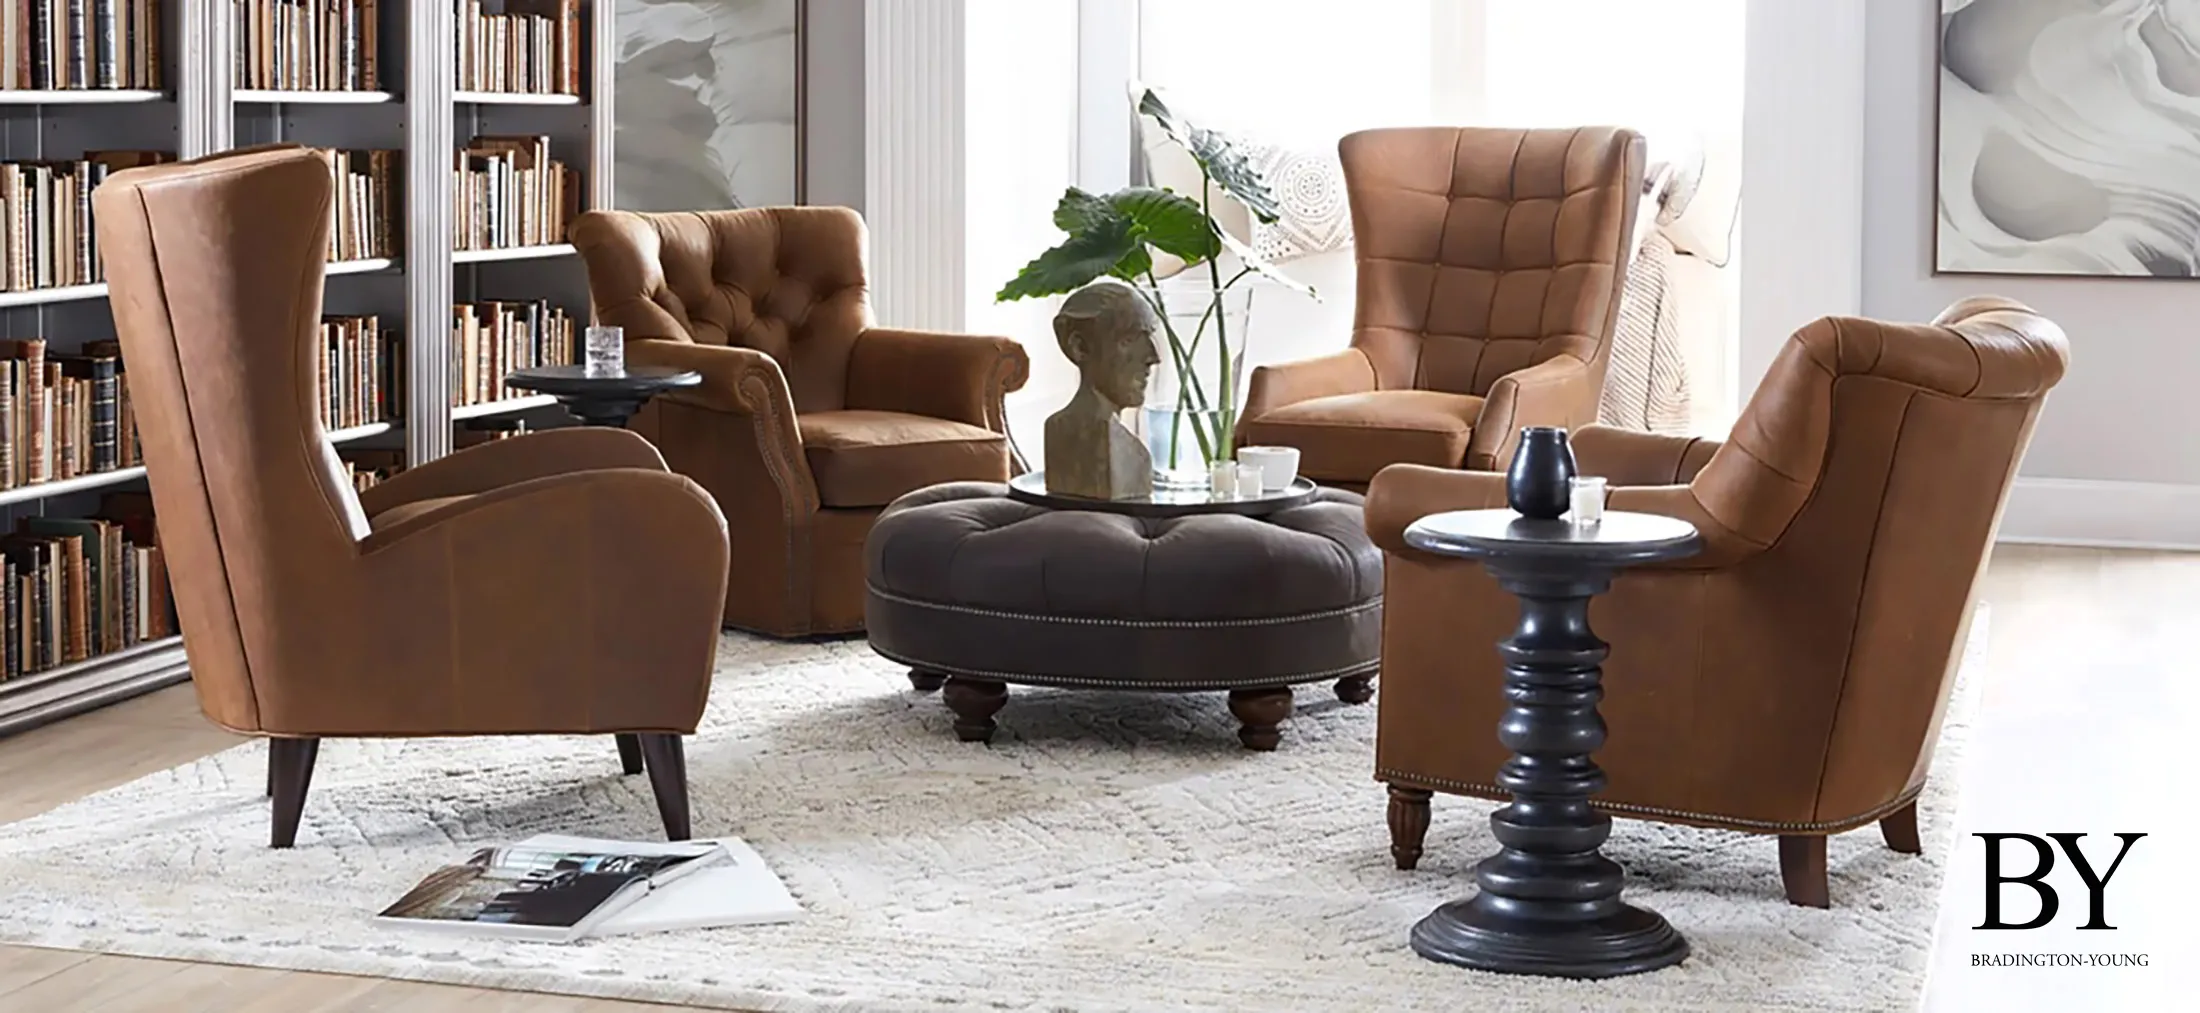 BYX Bradington Young Leather Furniture